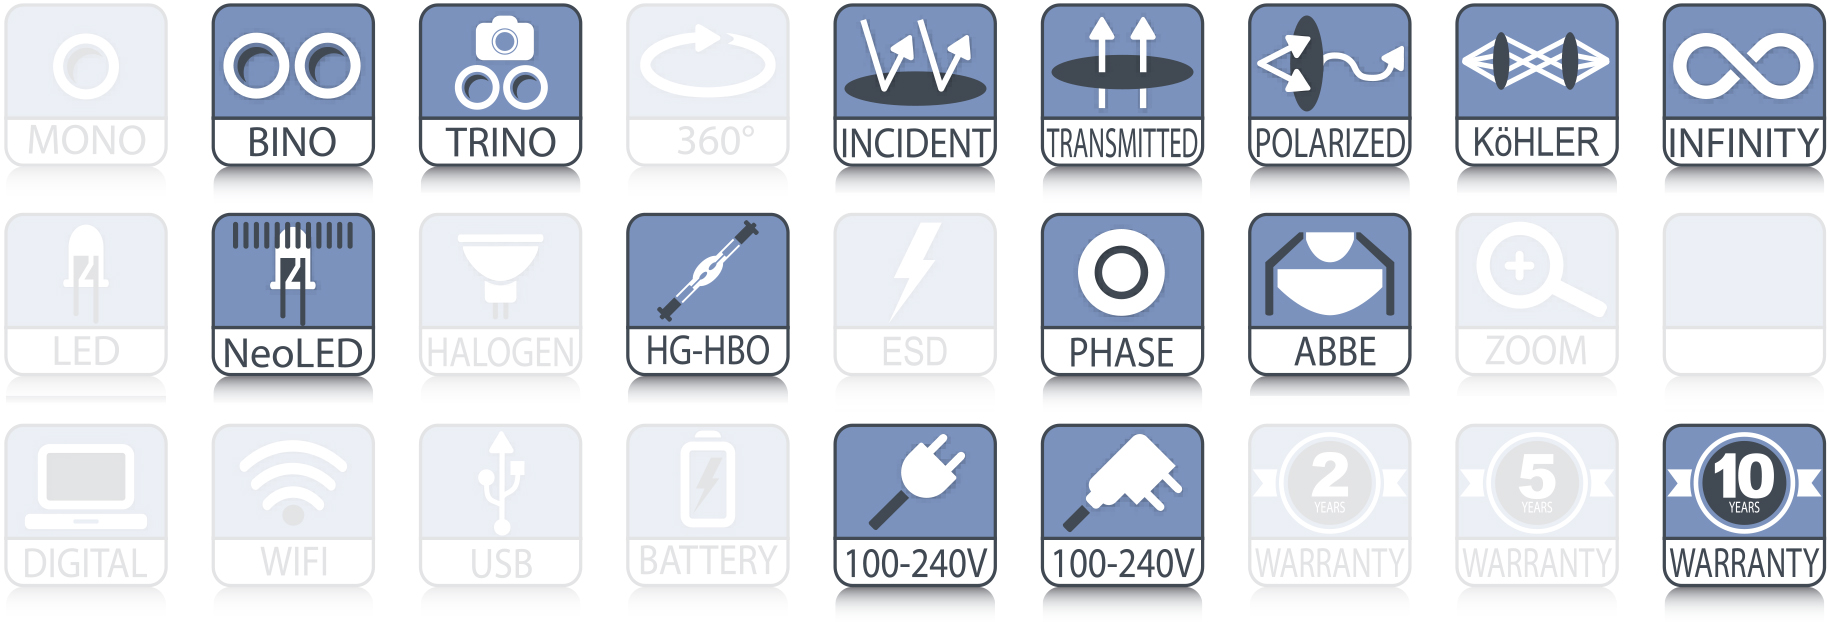 oxion_fluor_icons